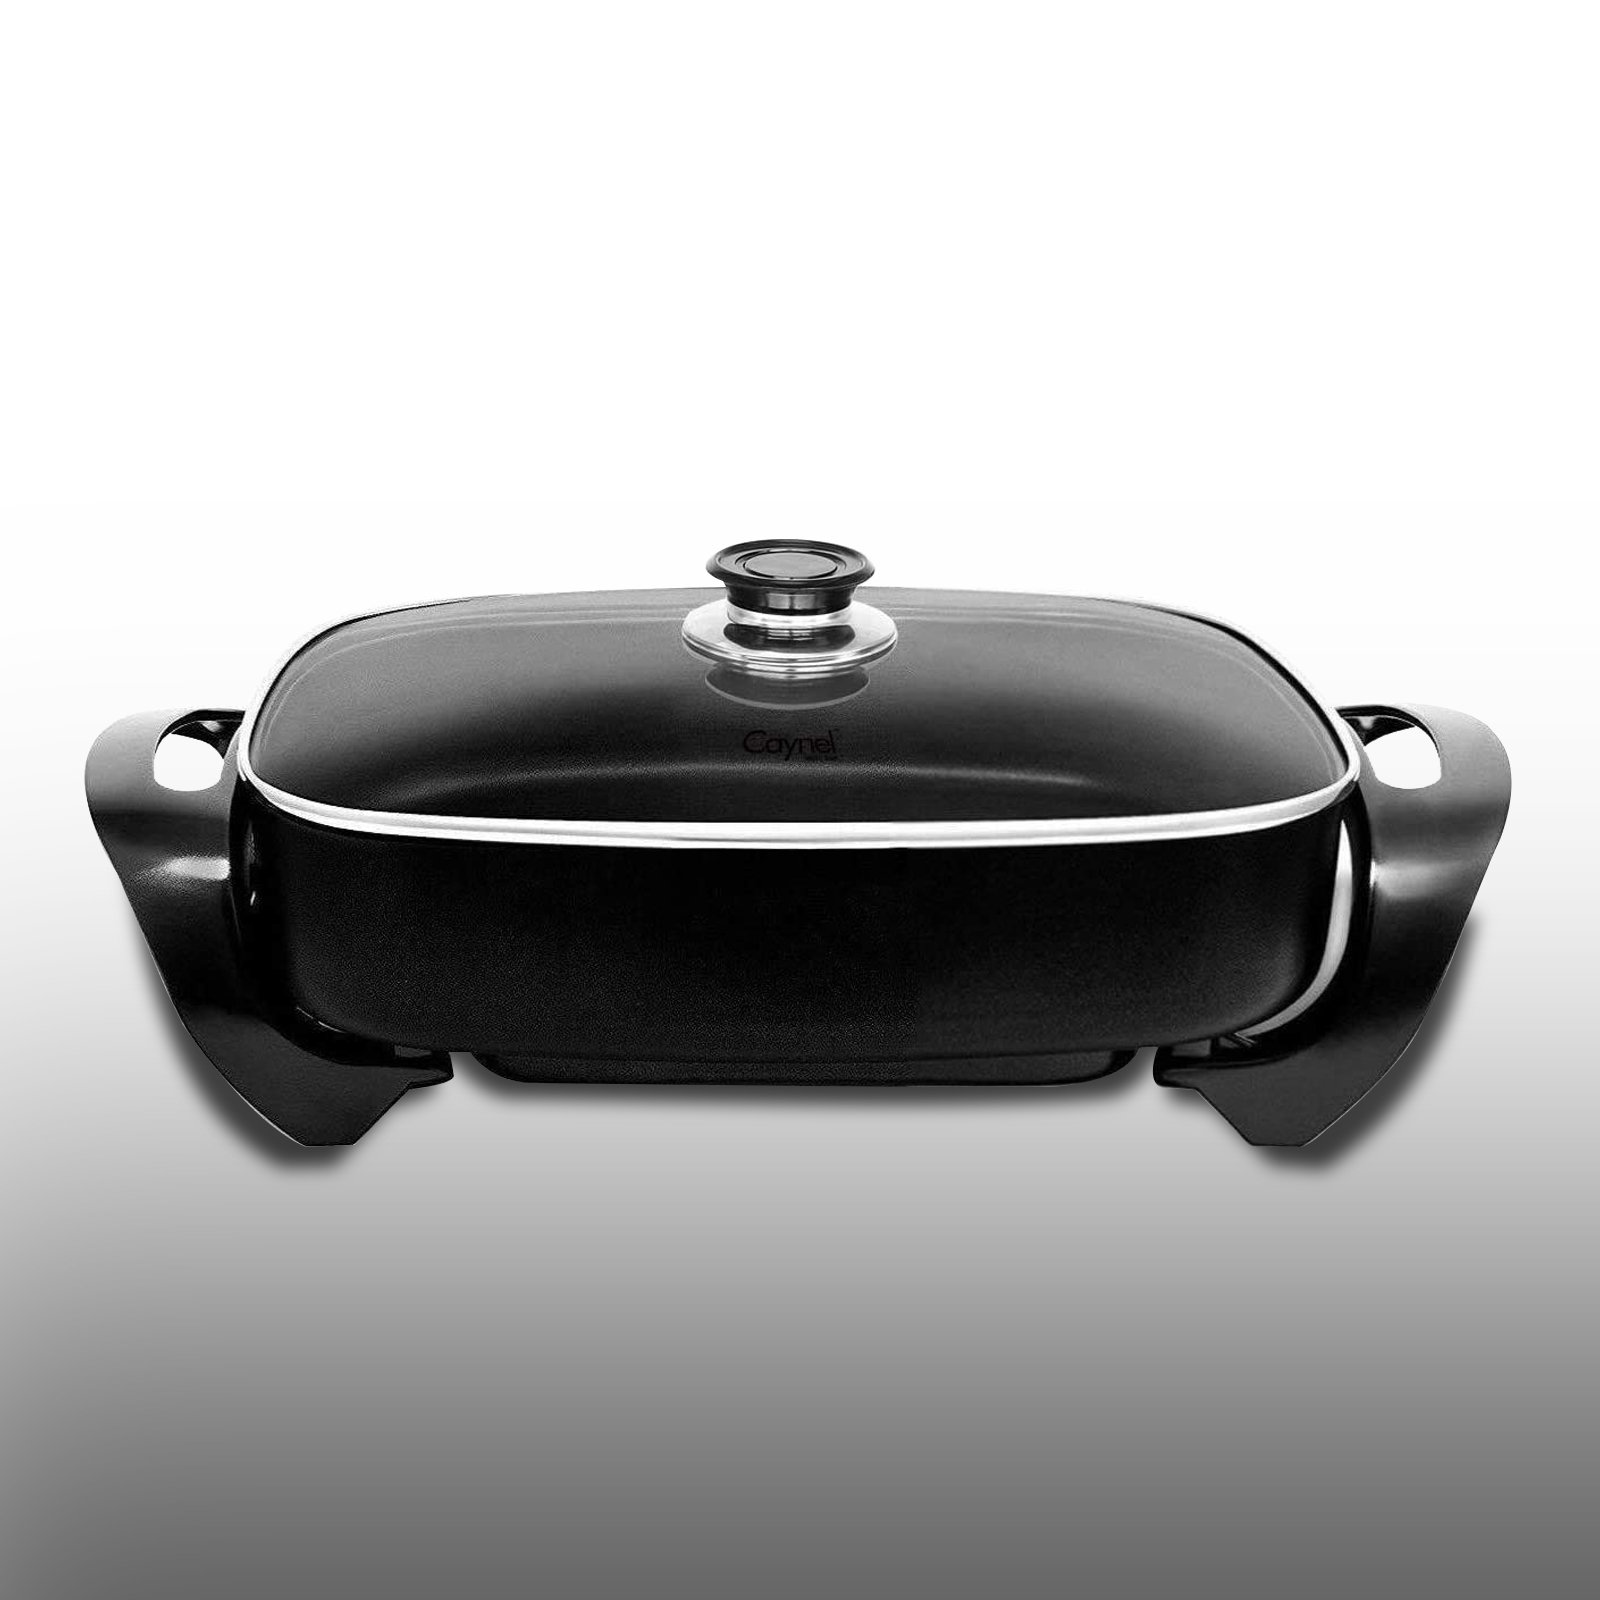 GreenLife  Healthy Power Electric Skillet